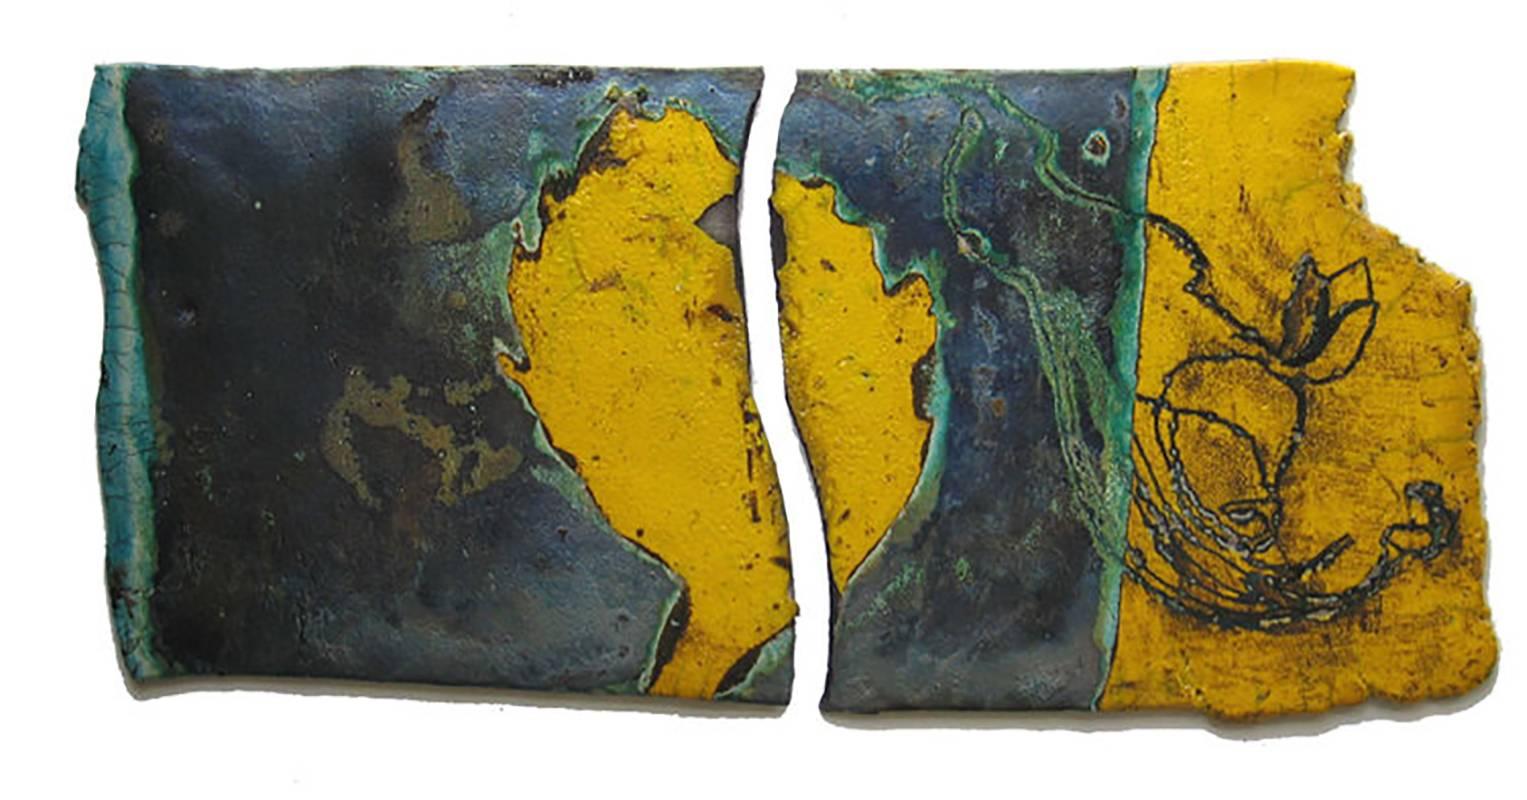 Yellow Diptych (Hanging Ceramic Scroll in Two Pieces) - Mixed Media Art by Anne Francey